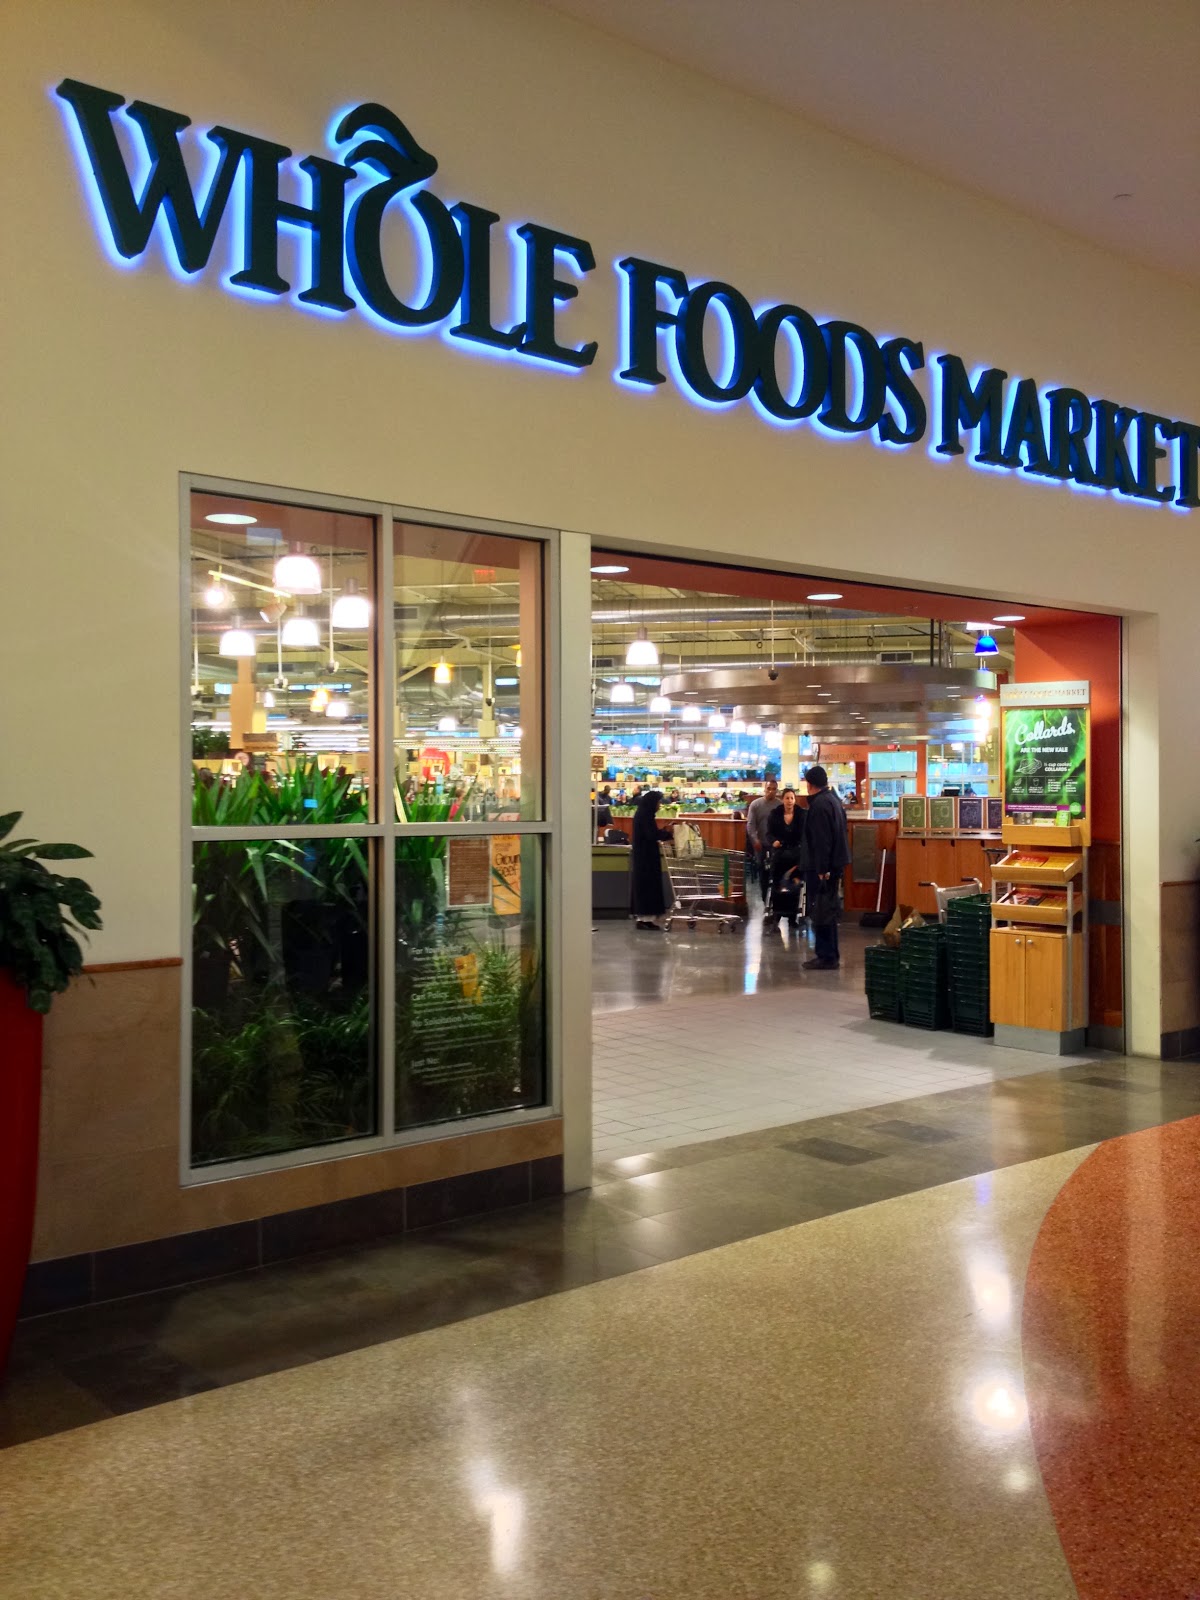 Do You Really Know What You're Eating?: Screw you, Fairway. Whole Foods